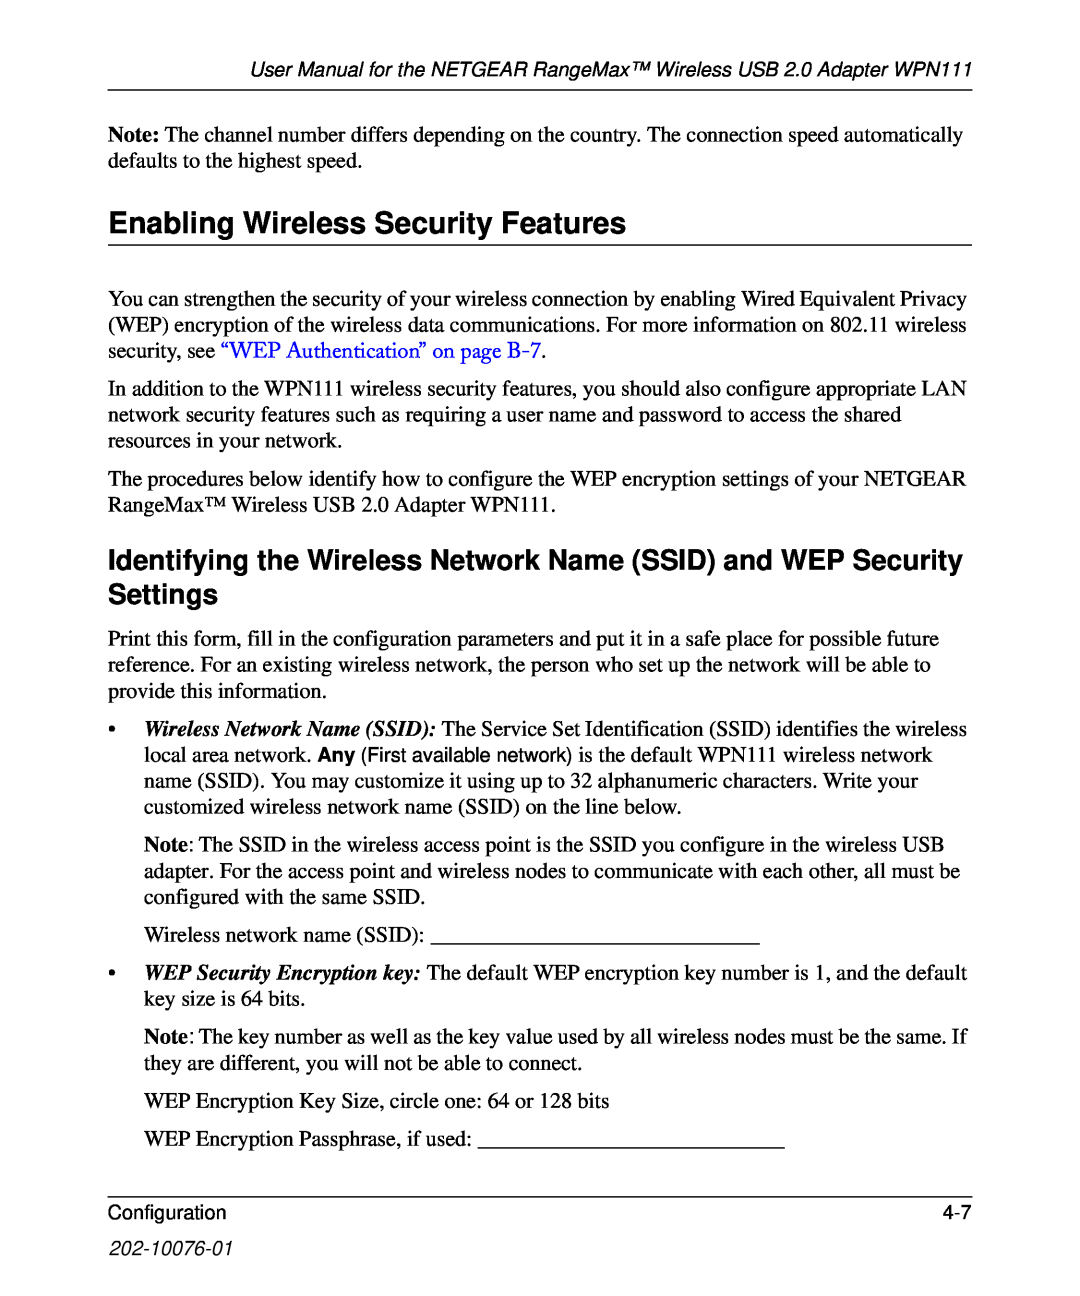 NETGEAR WPN111 Enabling Wireless Security Features, Identifying the Wireless Network Name SSID and WEP Security Settings 